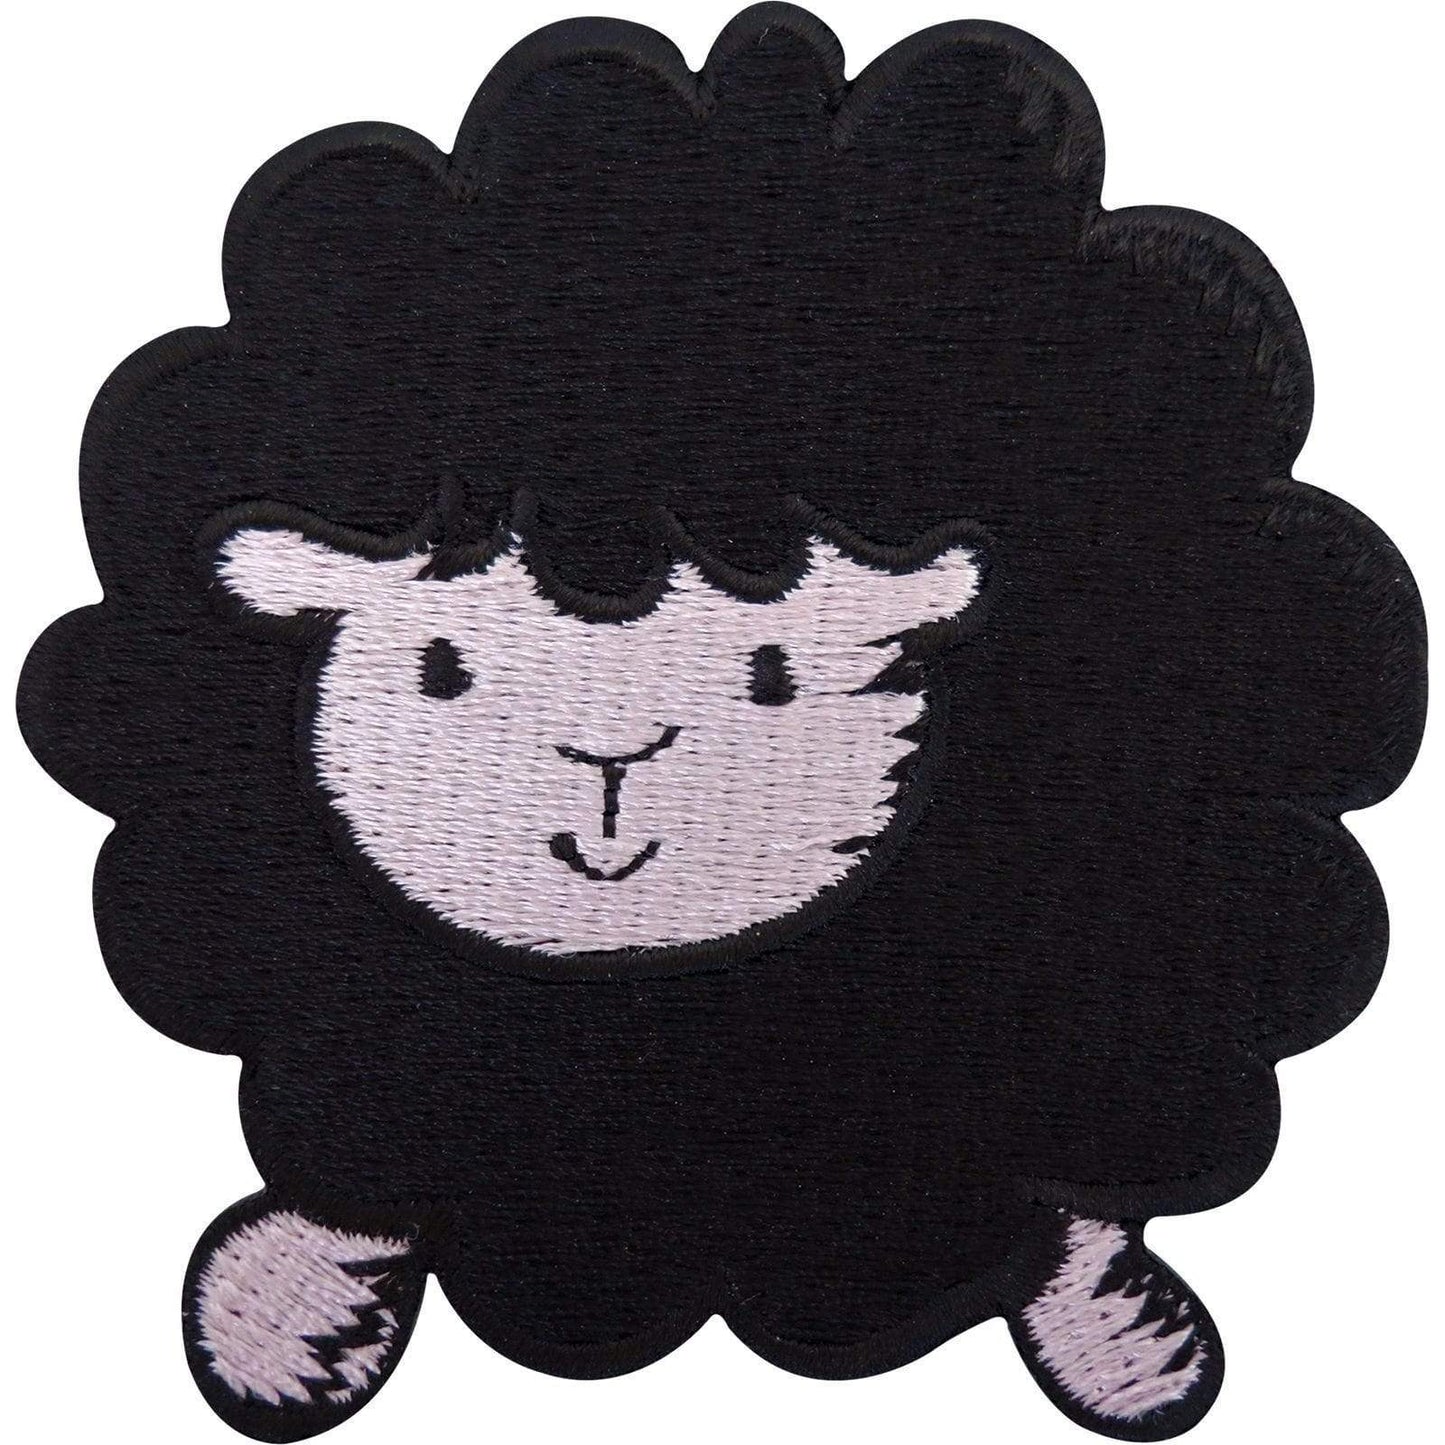 Black Sheep Patch Embroidered Badge Iron On Sew On Clothing Jacket Bag Jeans Hat